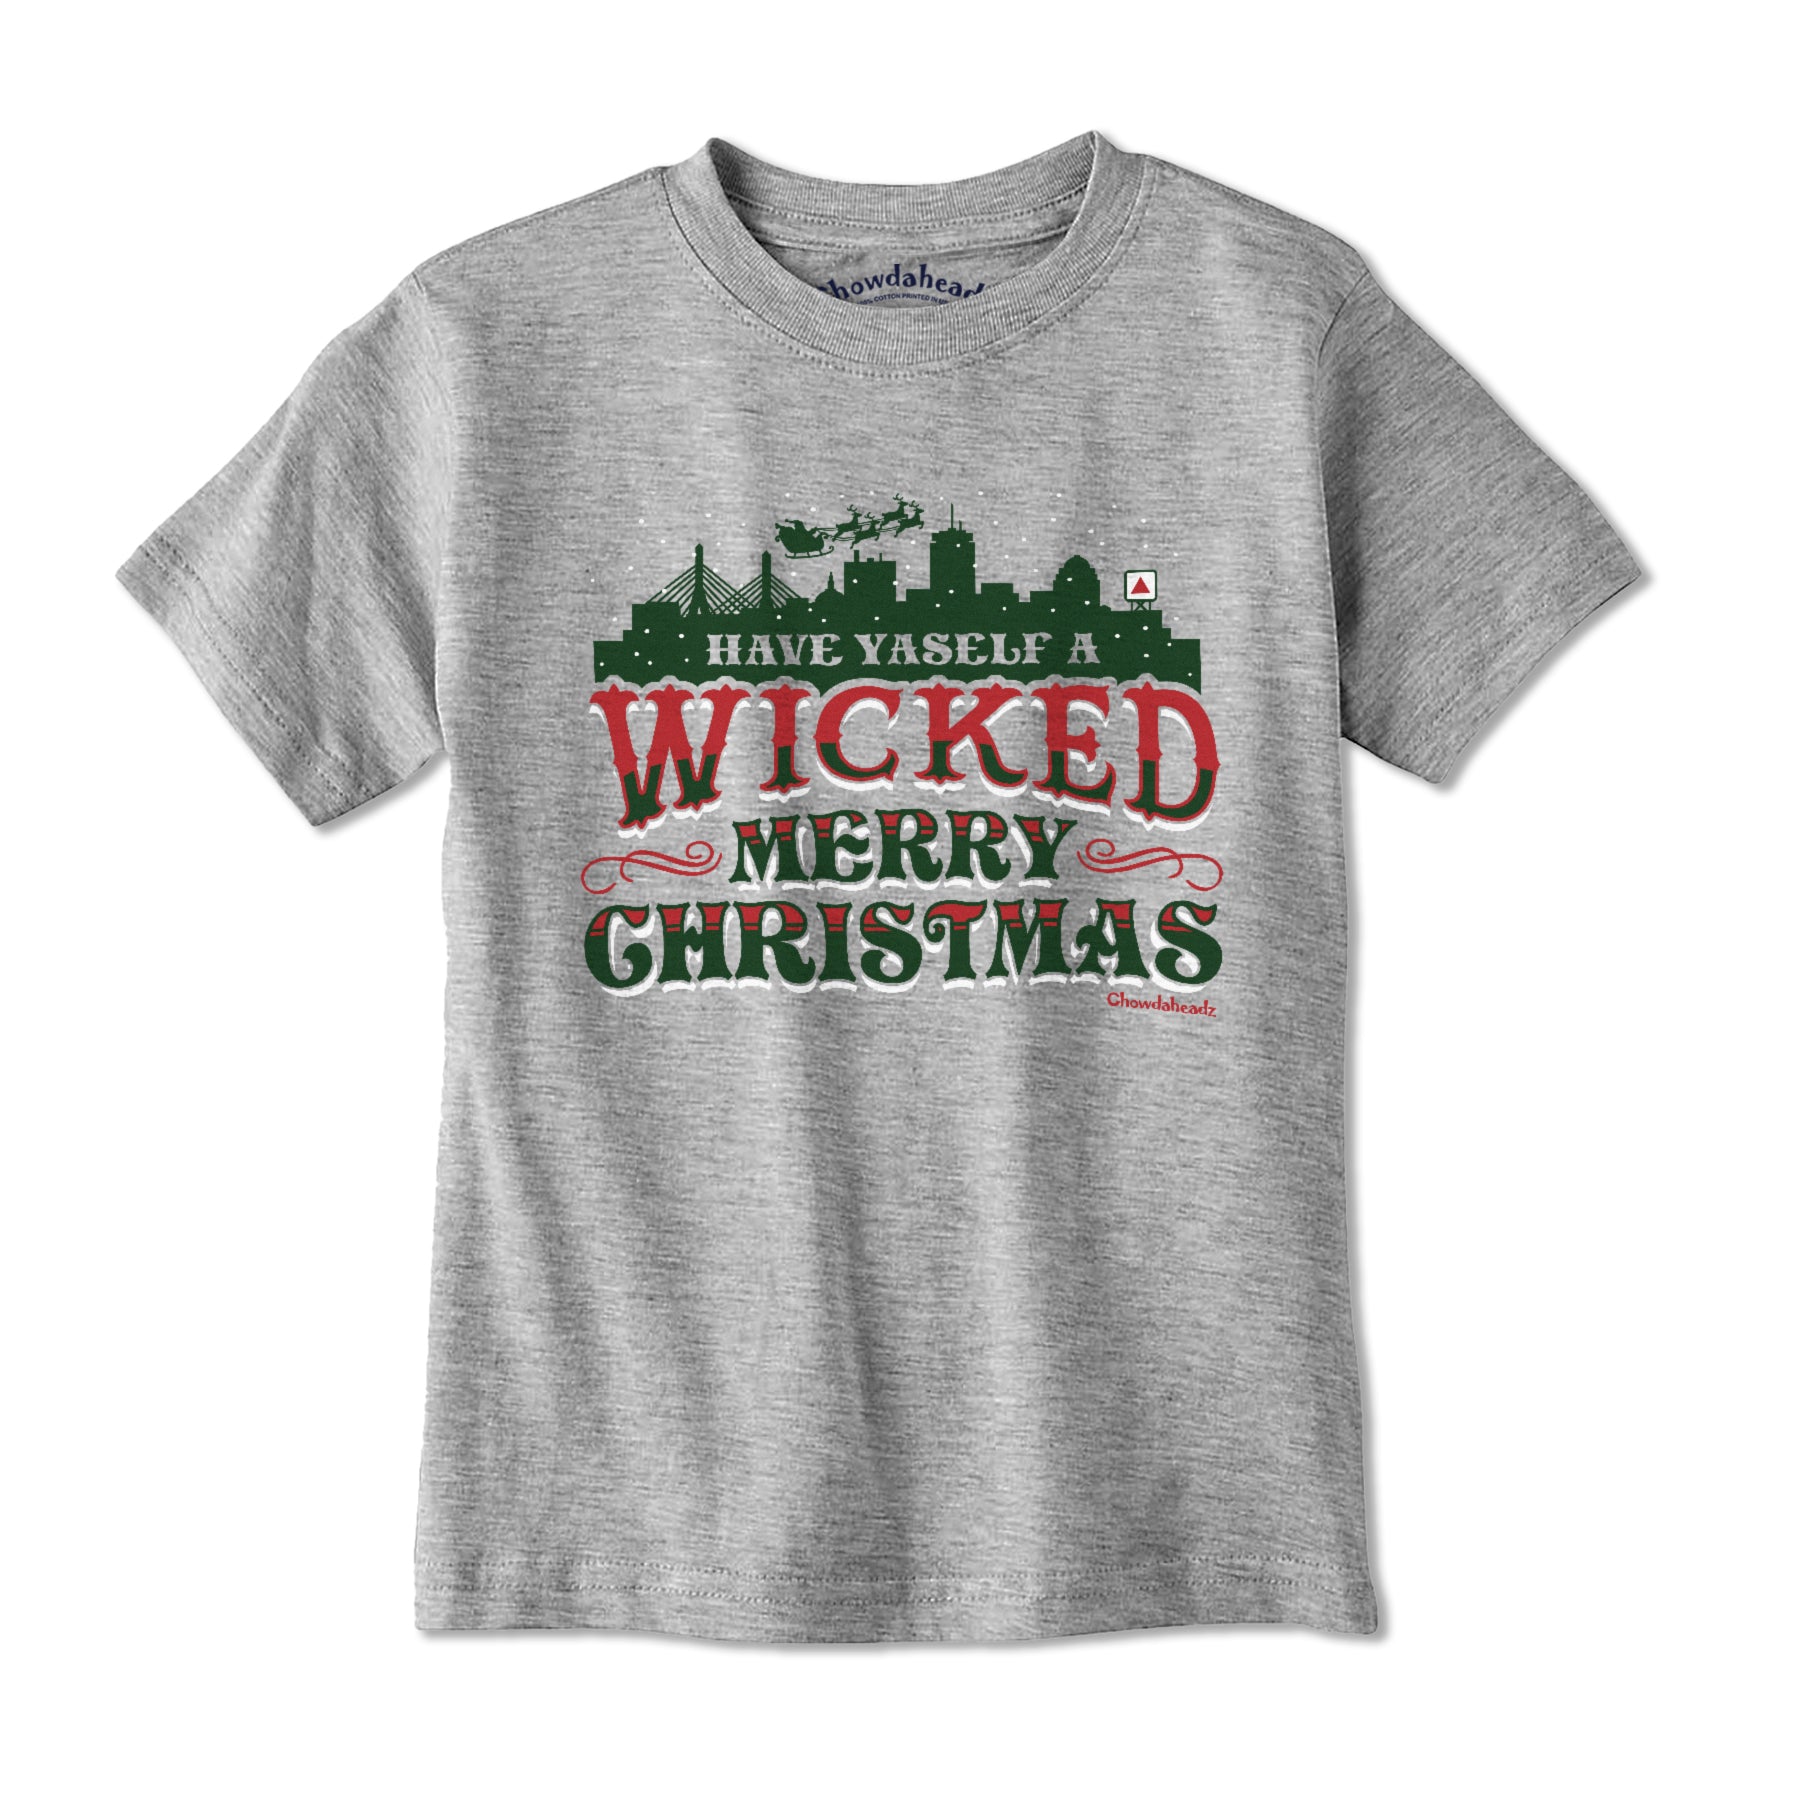 Have Yaself a Wicked Merry Christmas Youth T-Shirt - Chowdaheadz